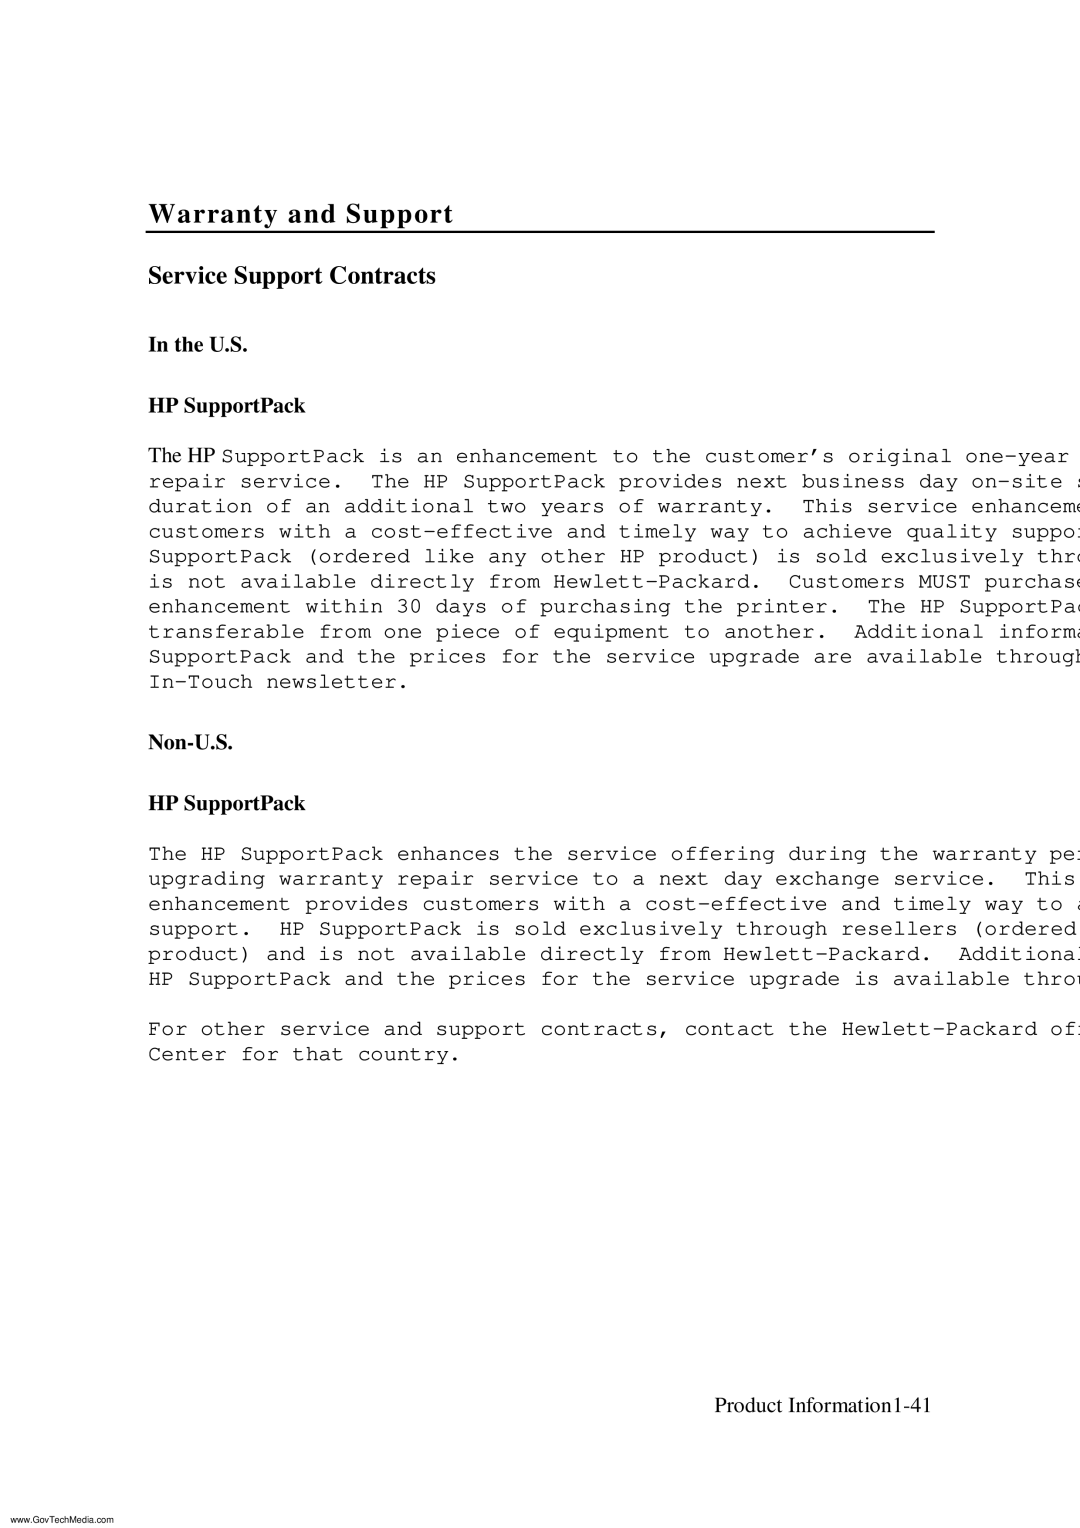 HP ColorPro CAD manual Service Support Contracts, Non-U.S HP SupportPack 